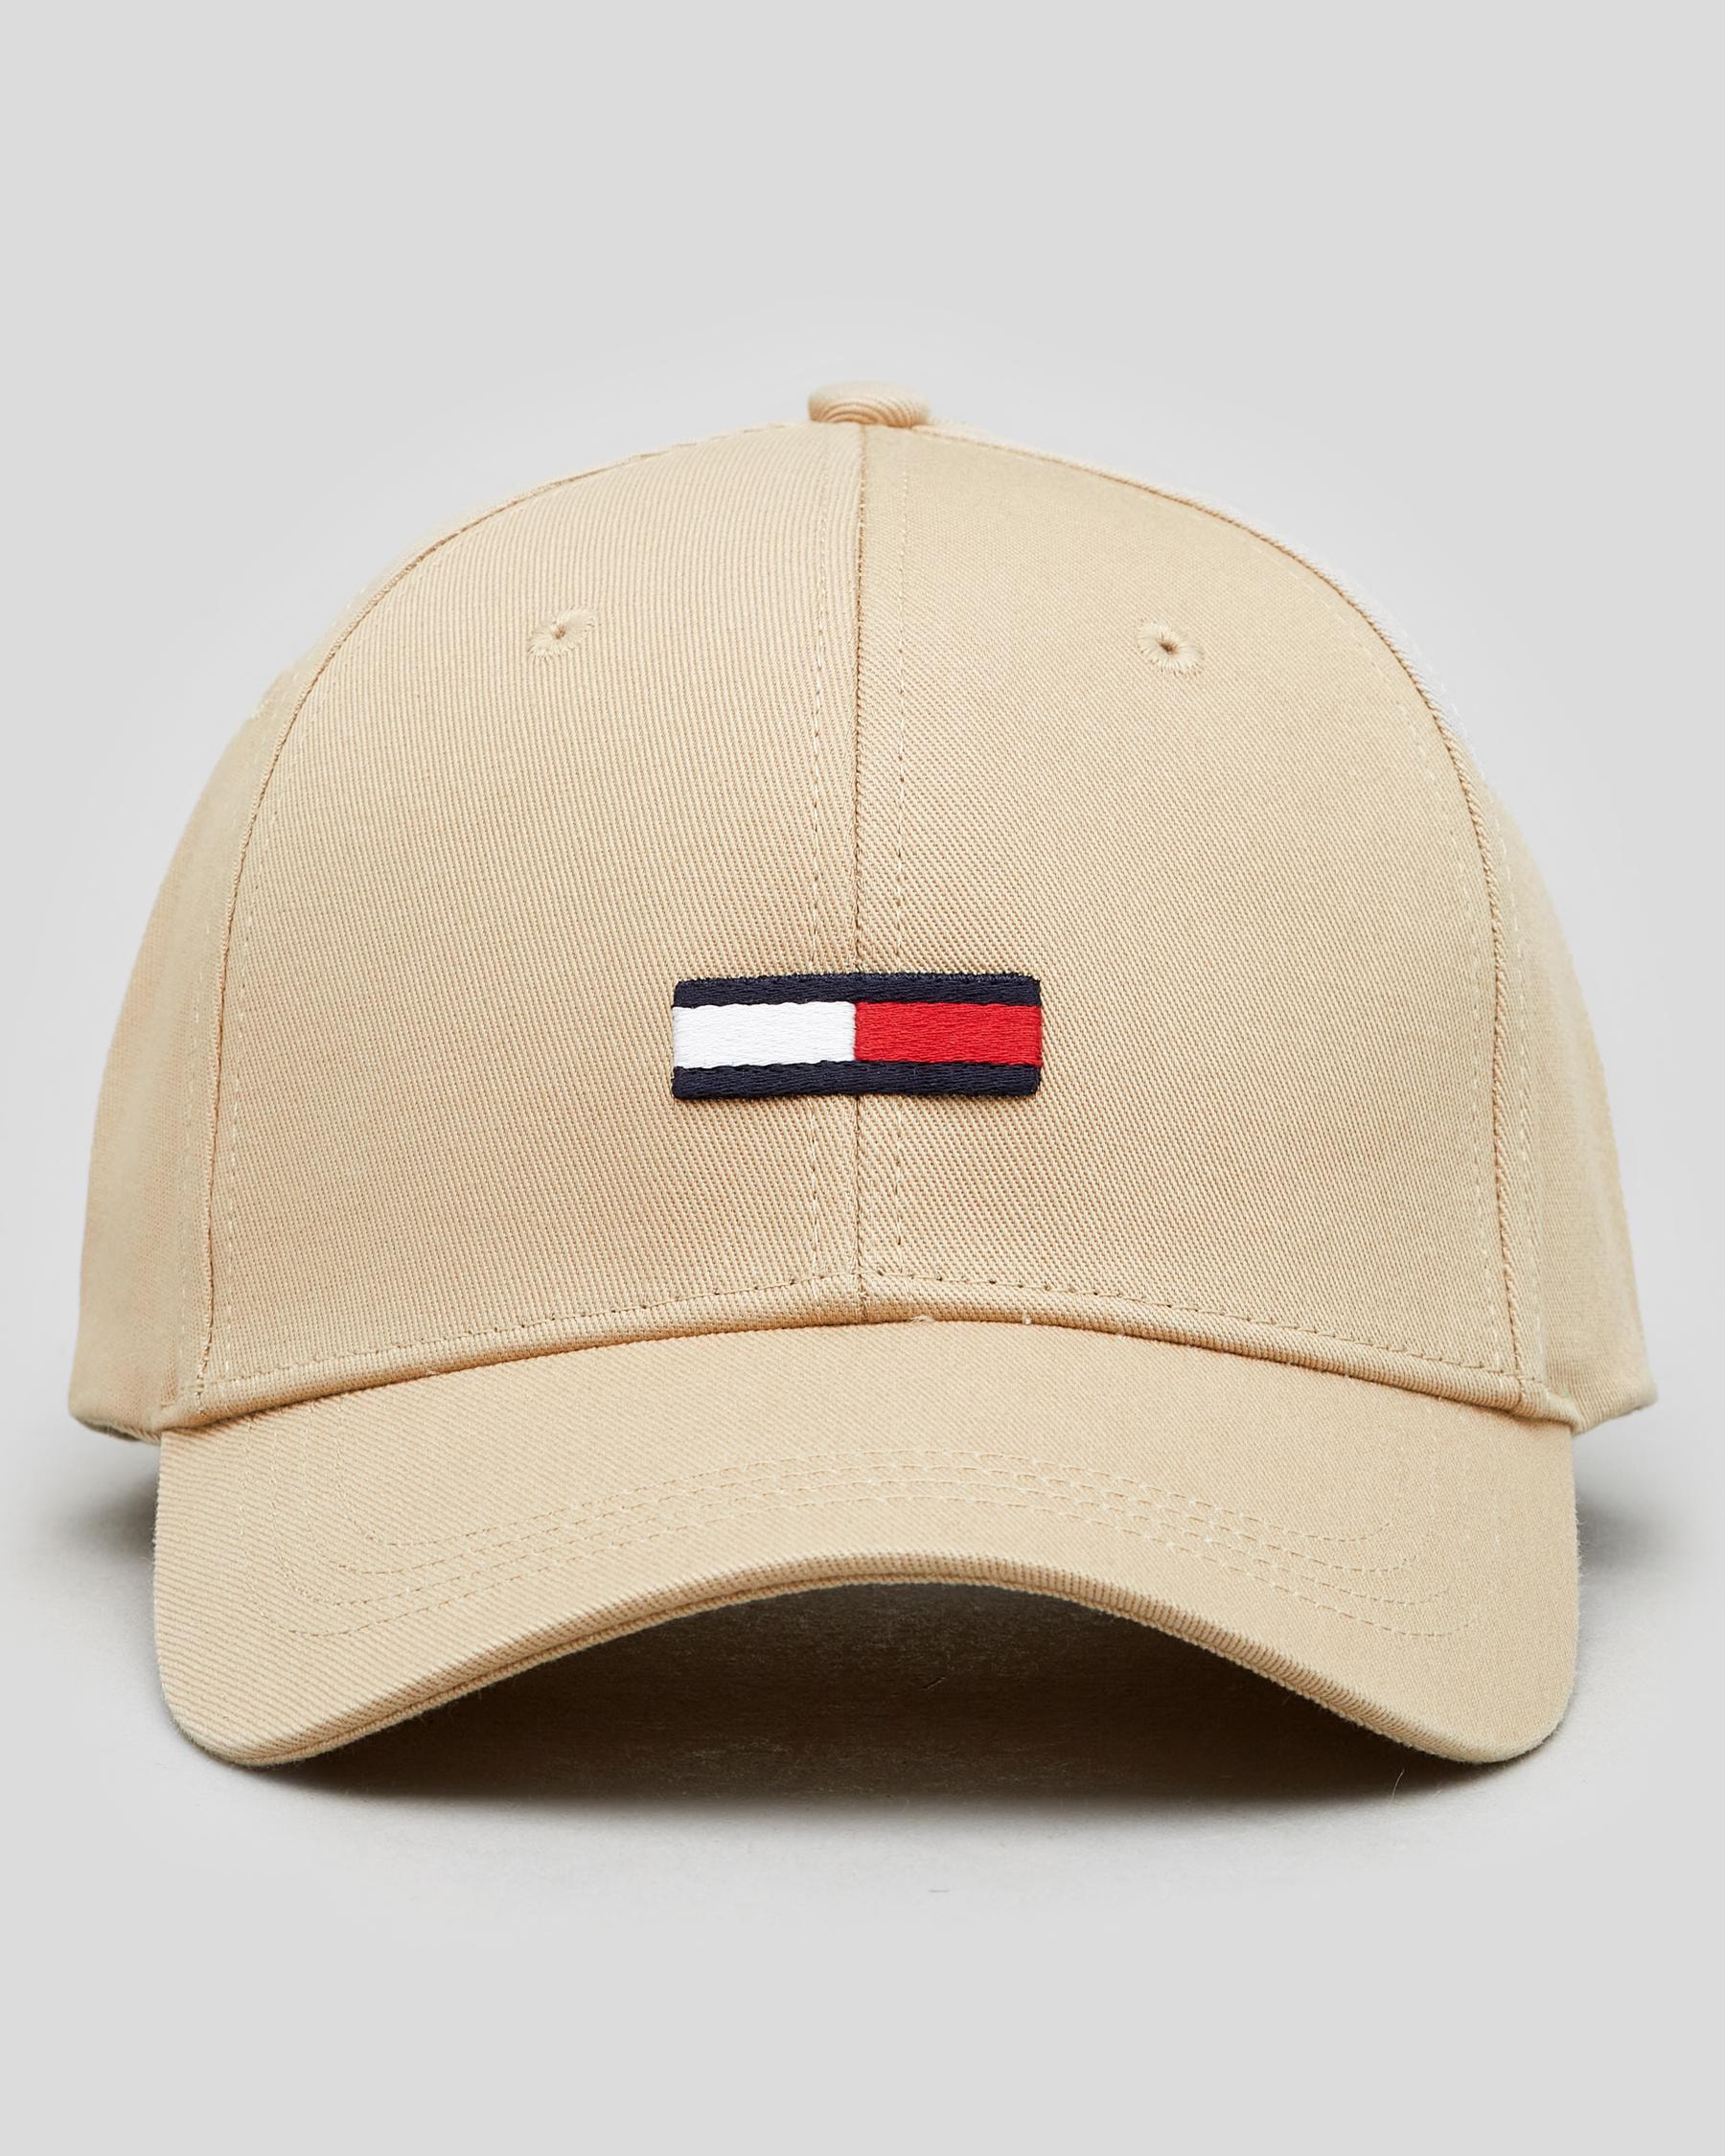 Tommy Hilfiger TJM Flag Shipping FREE* Cap Returns Beige & Soft States - - United City Easy Beach In